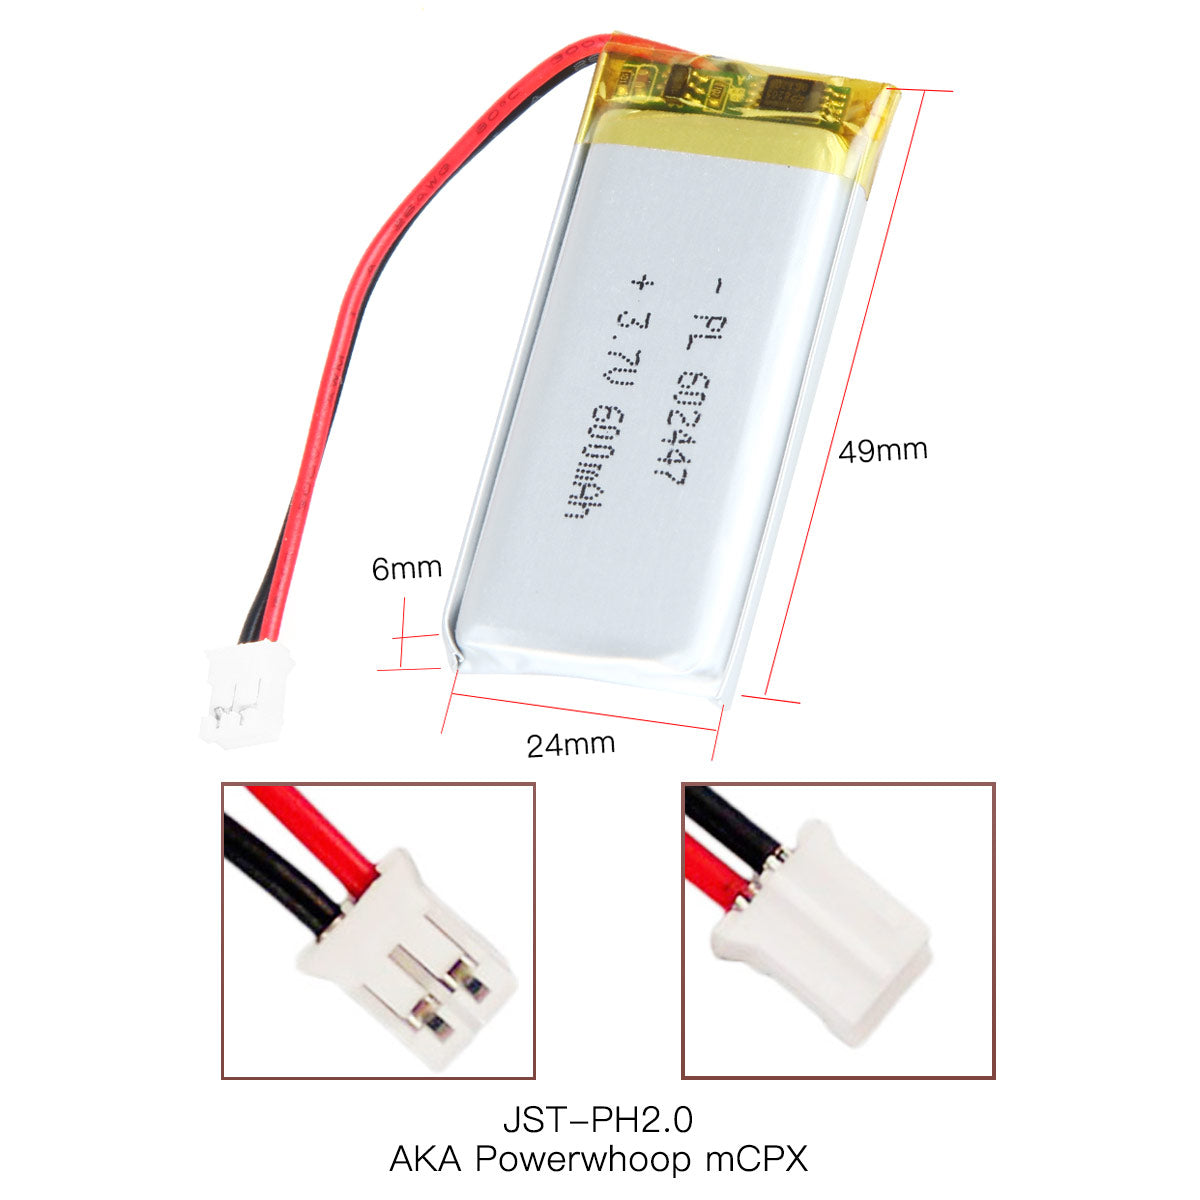 YDL 3.7V 600mAh 602447 Rechargeable Polymer Lithium-Ion Battery